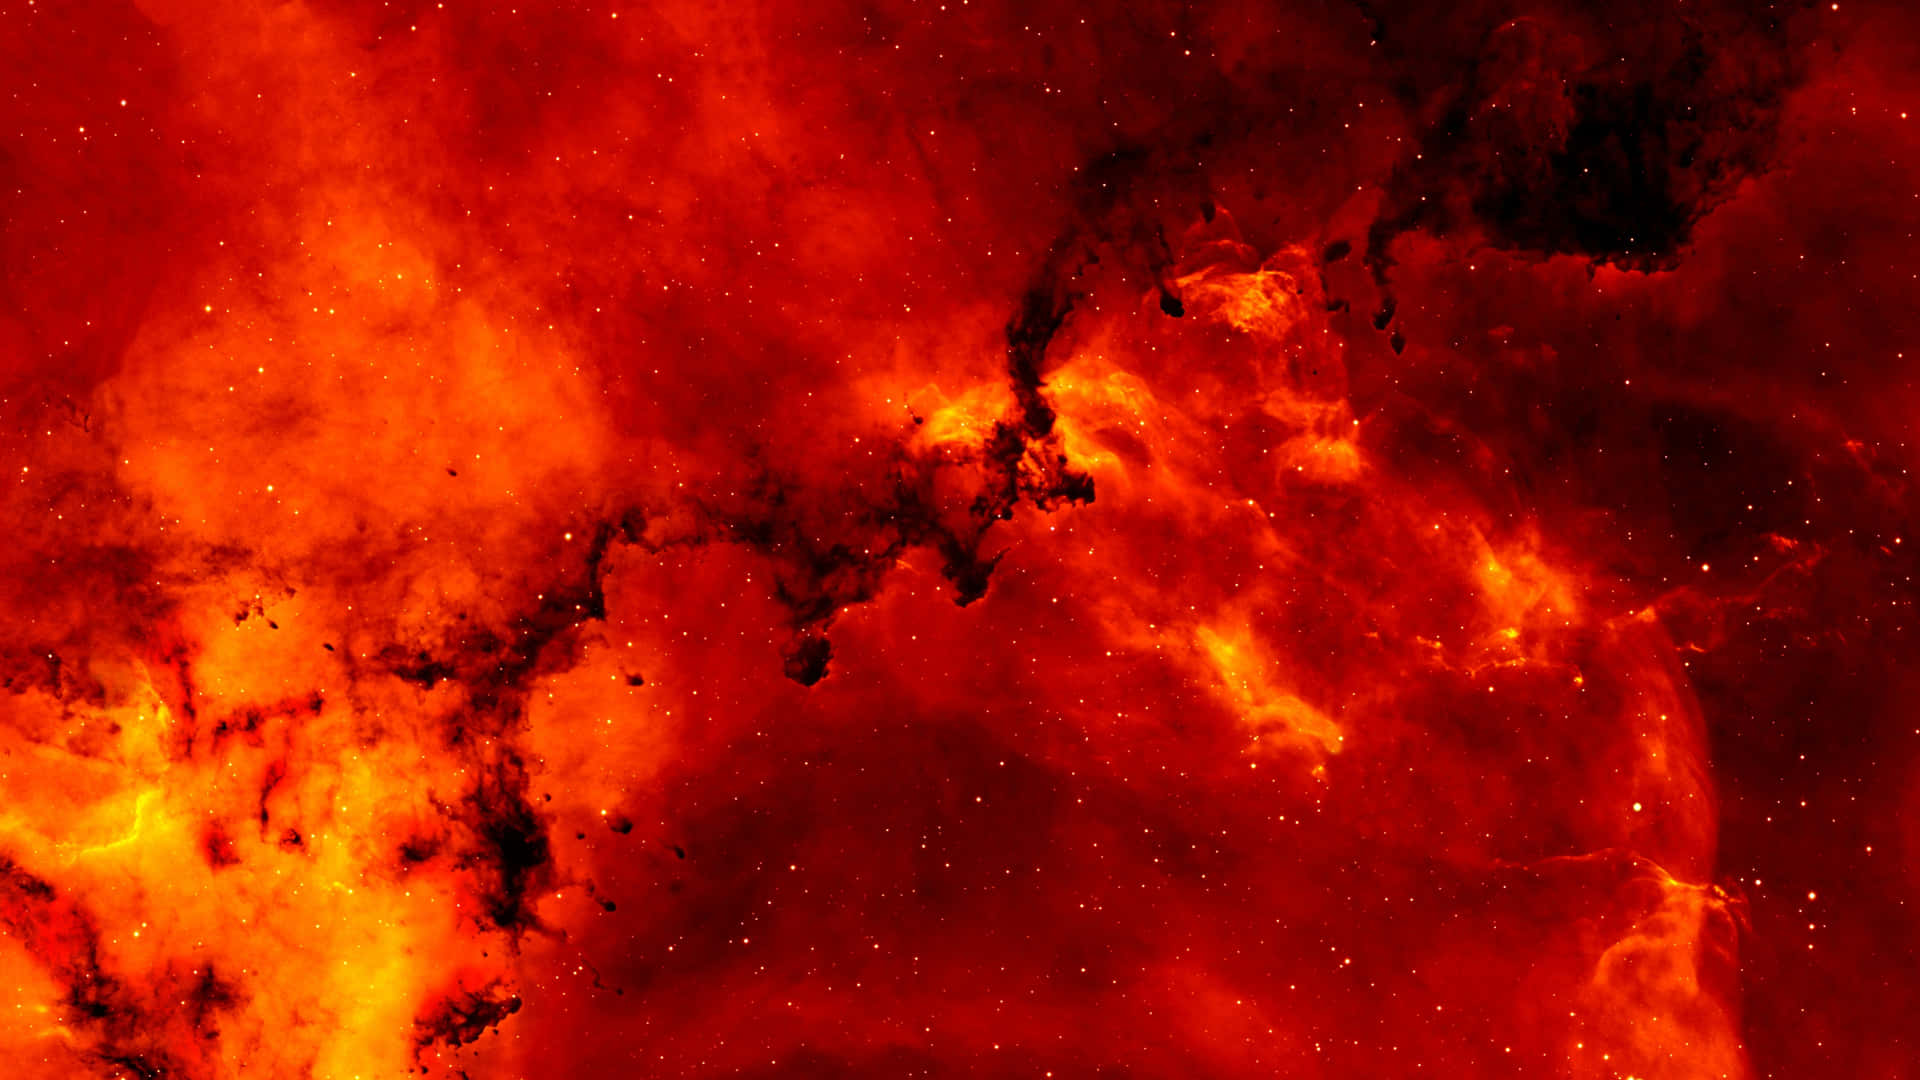 Explore the beauty of red space Wallpaper